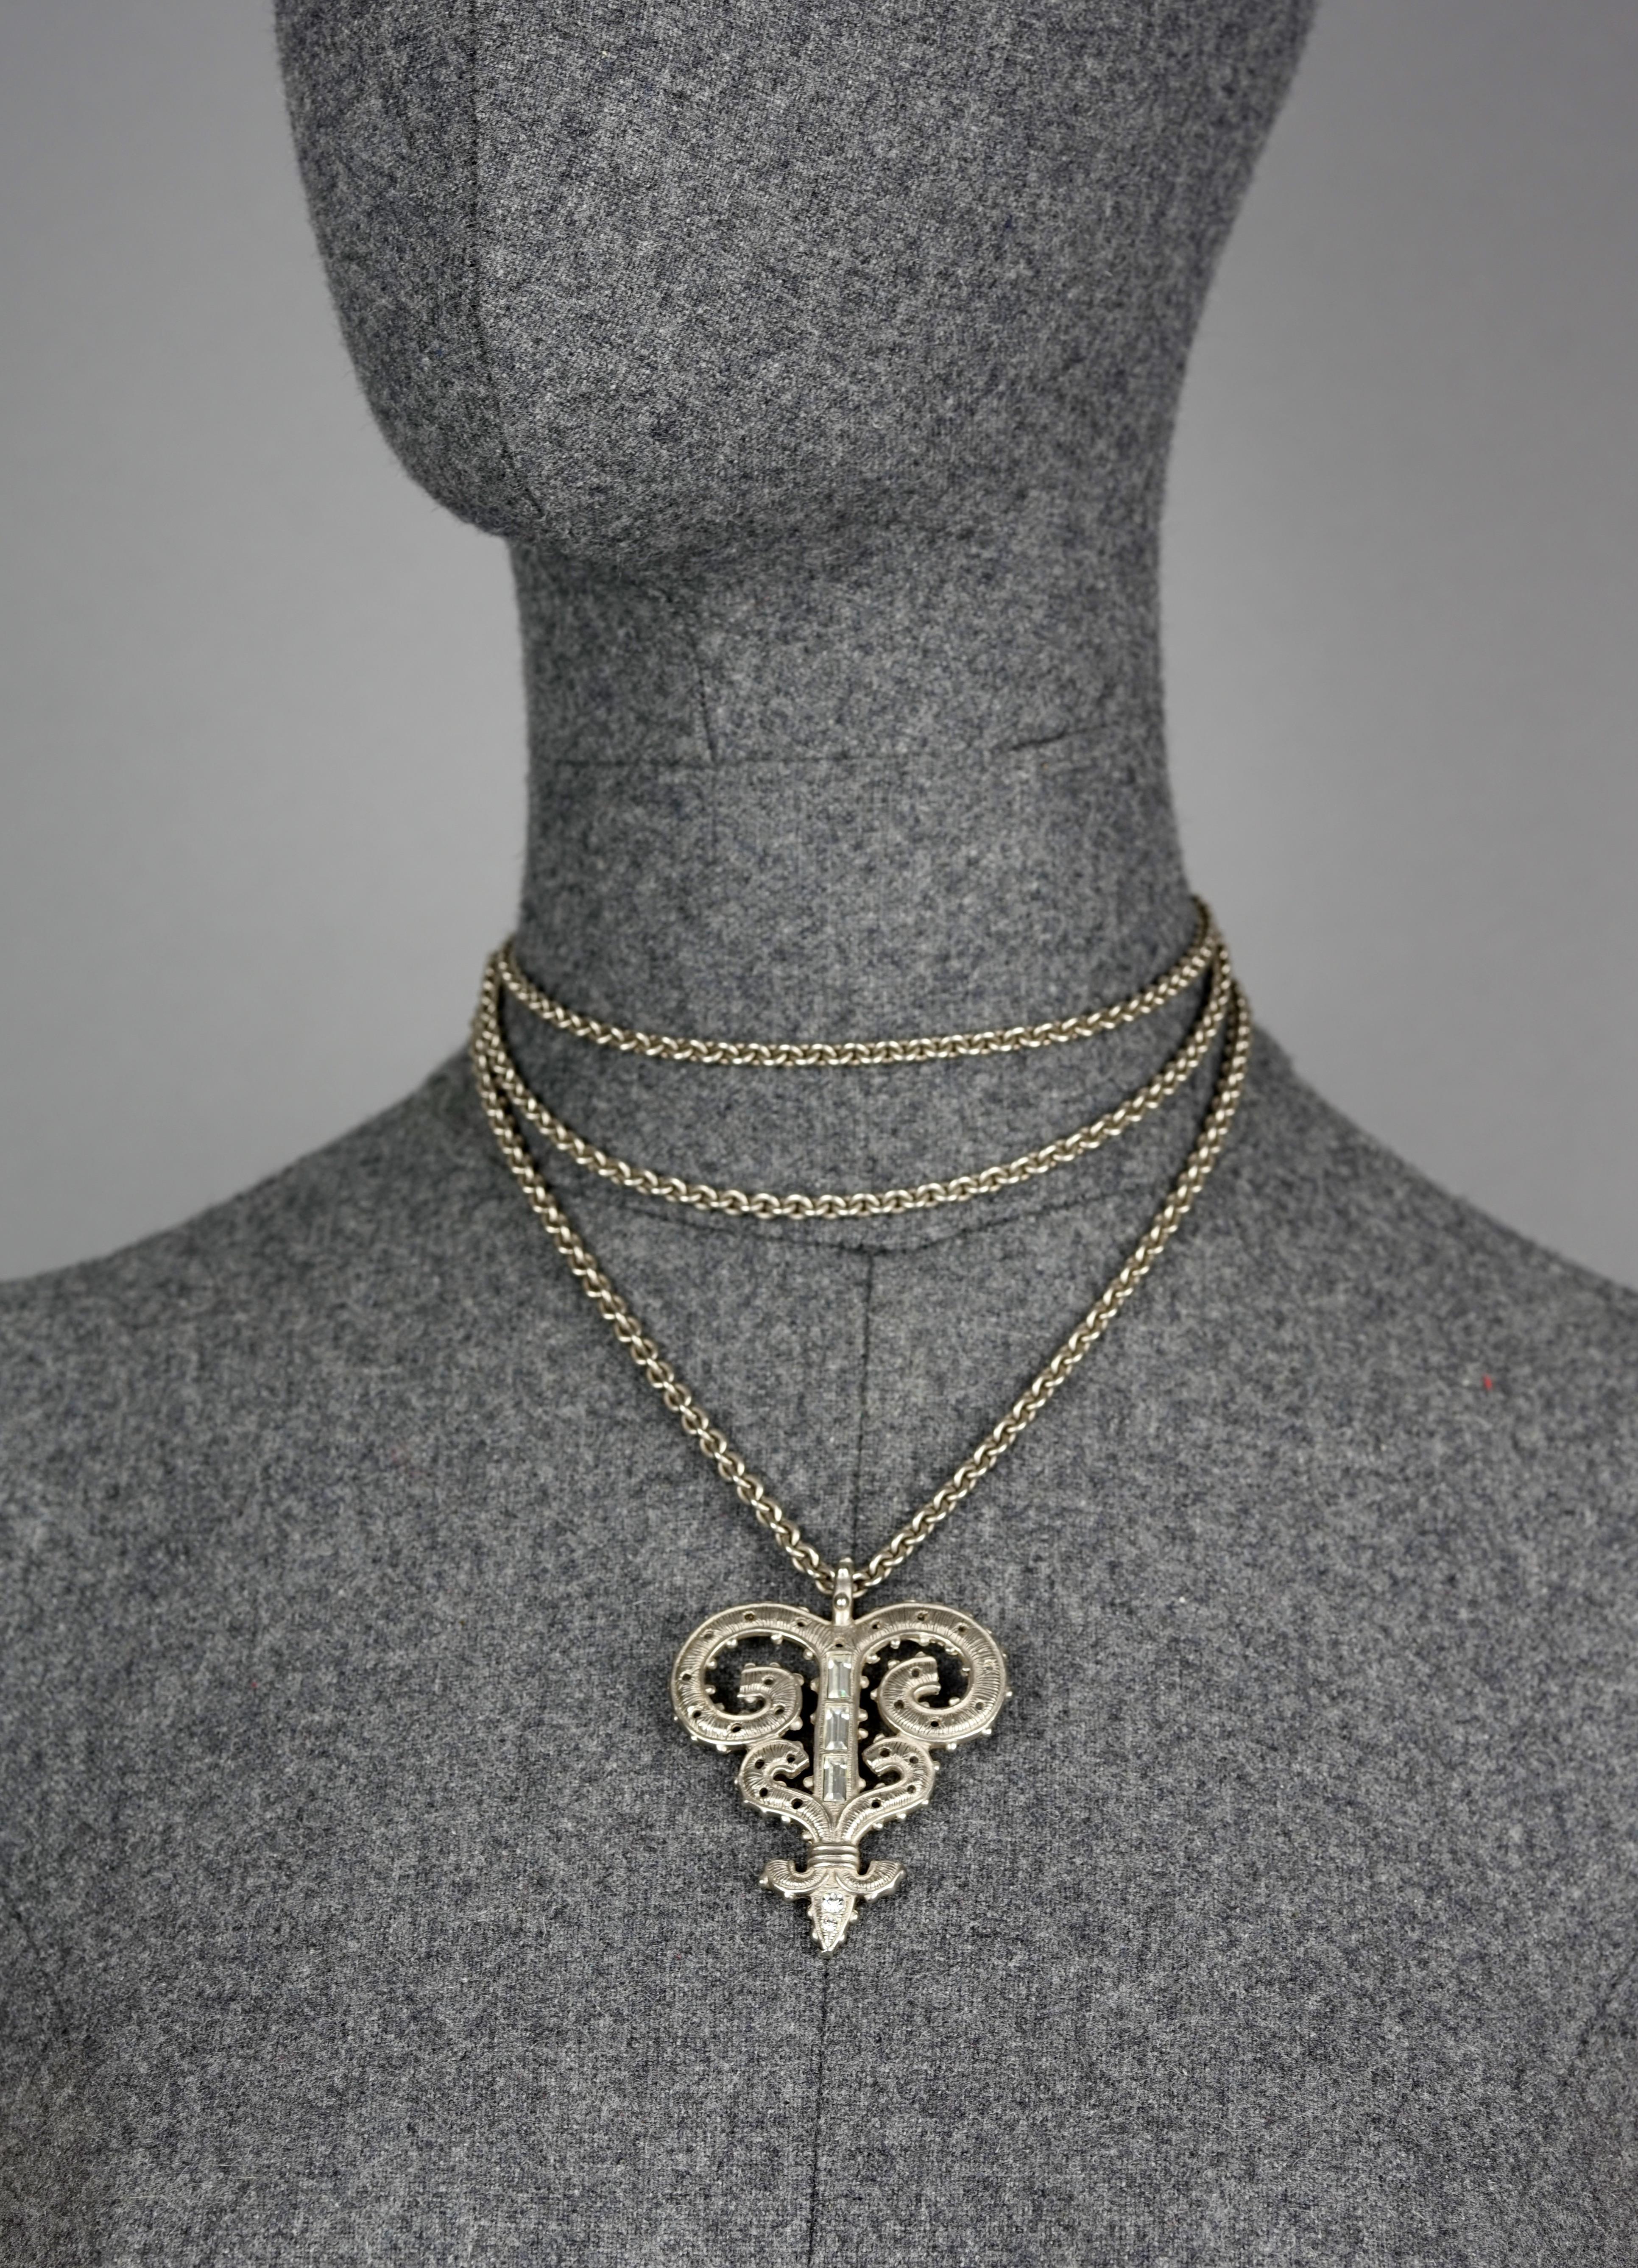 Vintage KARL LAGERFELD Gothic Fleur de Lys Rhinestone Necklace

Measurements:
Height: 2 4/8 inches (6.35 cm)
Width: 1 7/8 inches (4.76 cm)
Length: 45 inches (114.3 cm)

Features:
- 100% Authentic KARL LAGERFELD.
- Long chain with Fleur de Lys